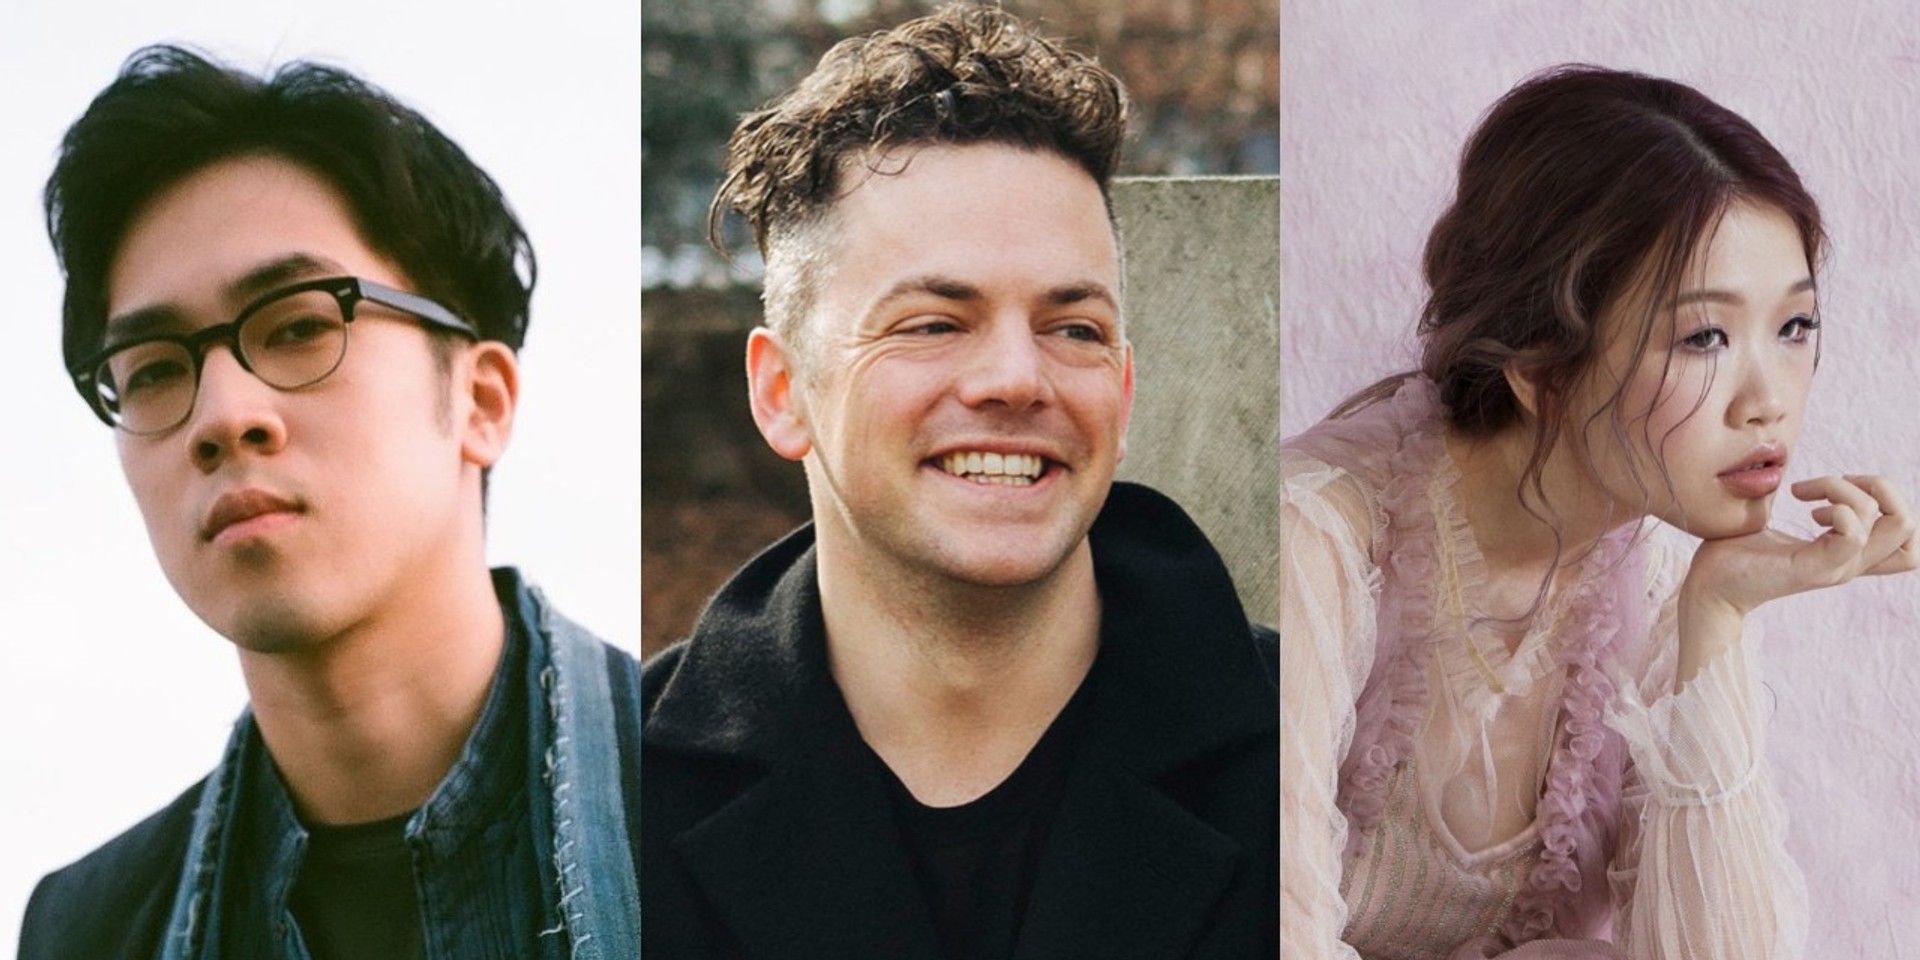 Nico Muhly deconstructs the music of Charlie Lim and Linying 